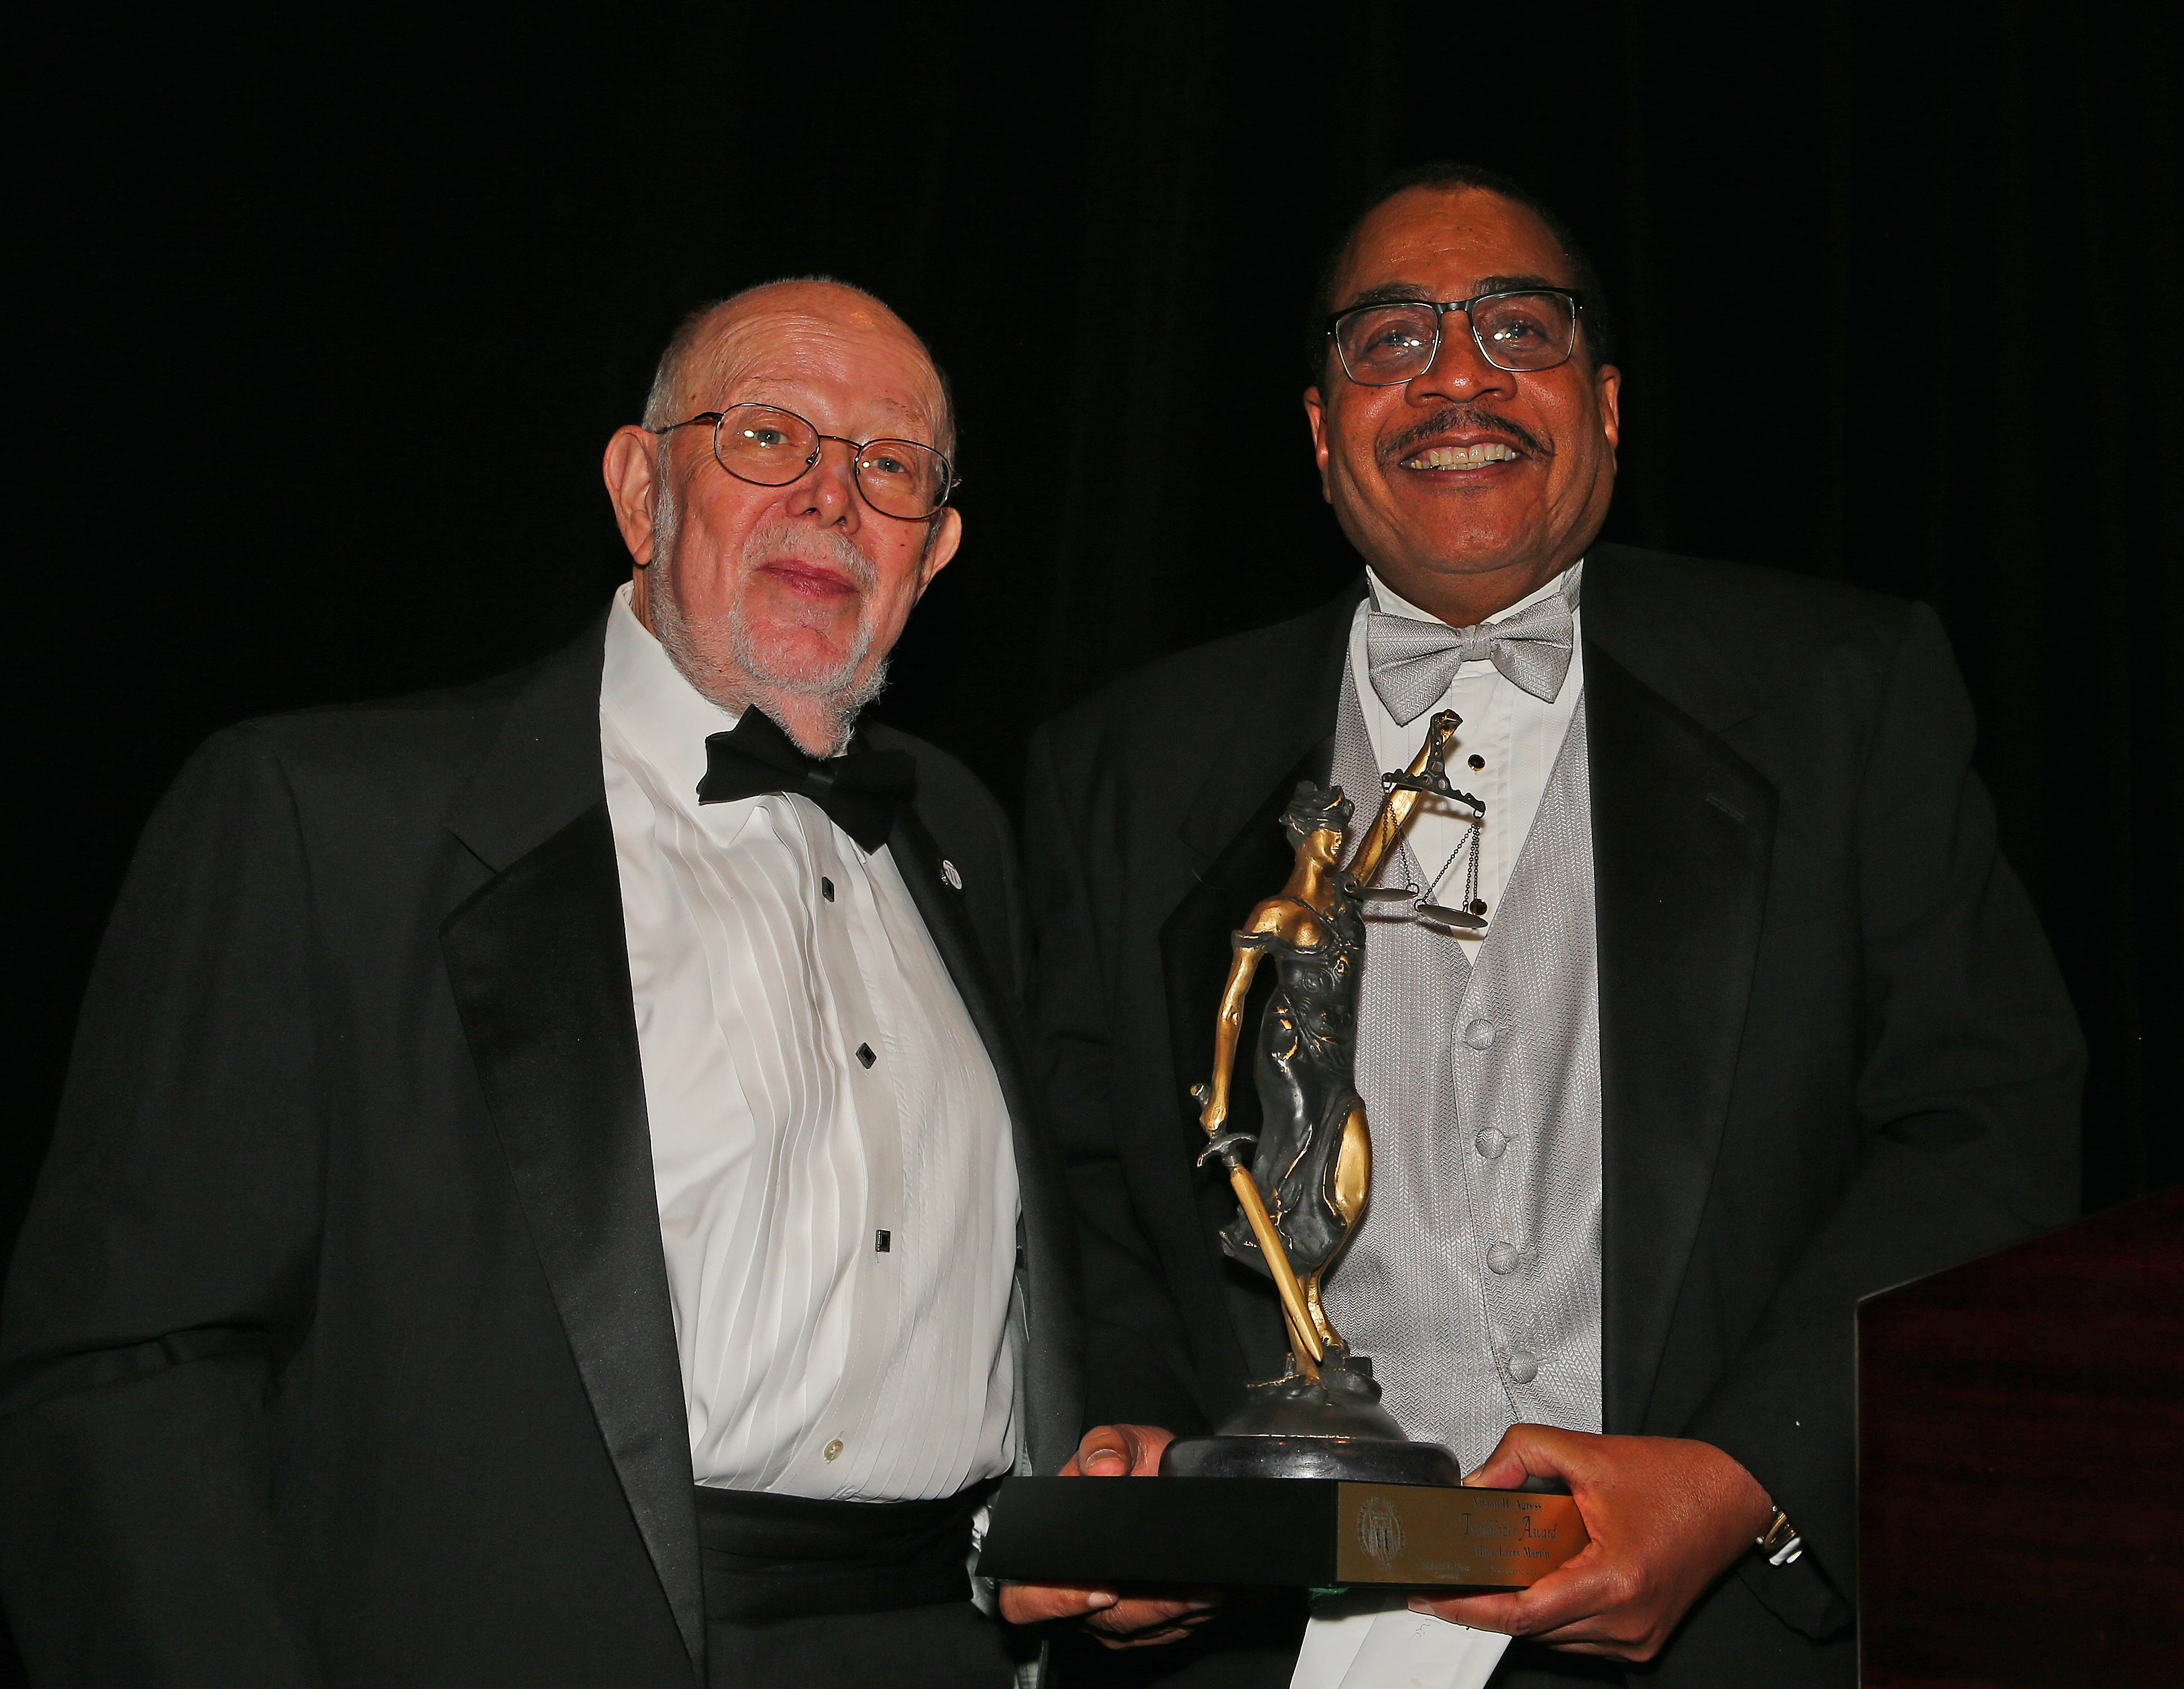 Hon. Larry Martin (right) was given the Vivian H. Agress Trailblazer Award by President David Chidekel at the annual Brooklyn Bar Association Foundation dinner, but he dedicated the award to his sister because he feels that she is the real trailblazer in the family. Eagle photo by Andy Katz